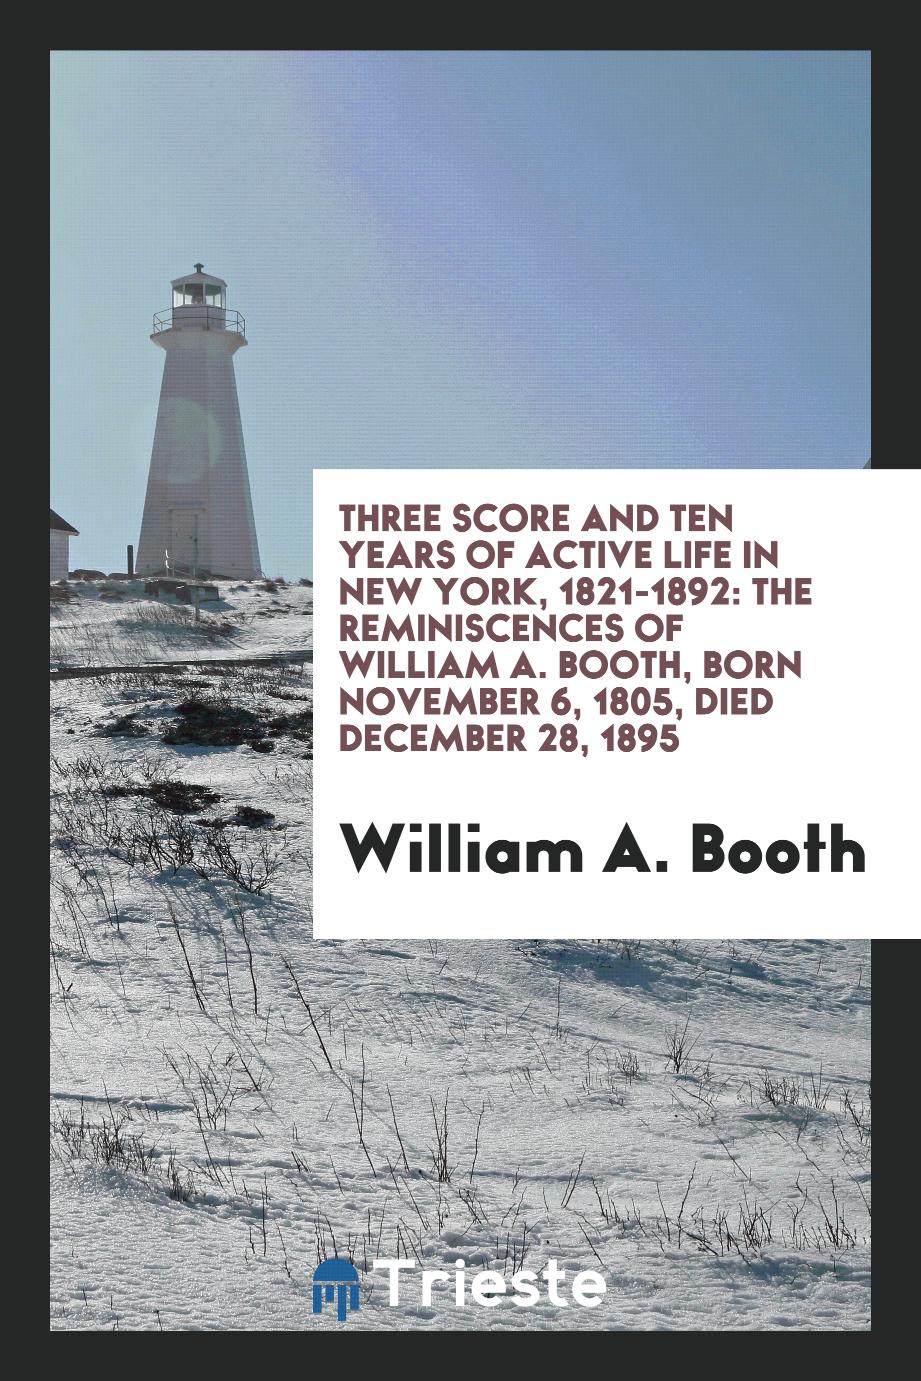 Three score and ten years of active life in New York, 1821-1892: the reminiscences of William A. Booth, born November 6, 1805, died December 28, 1895